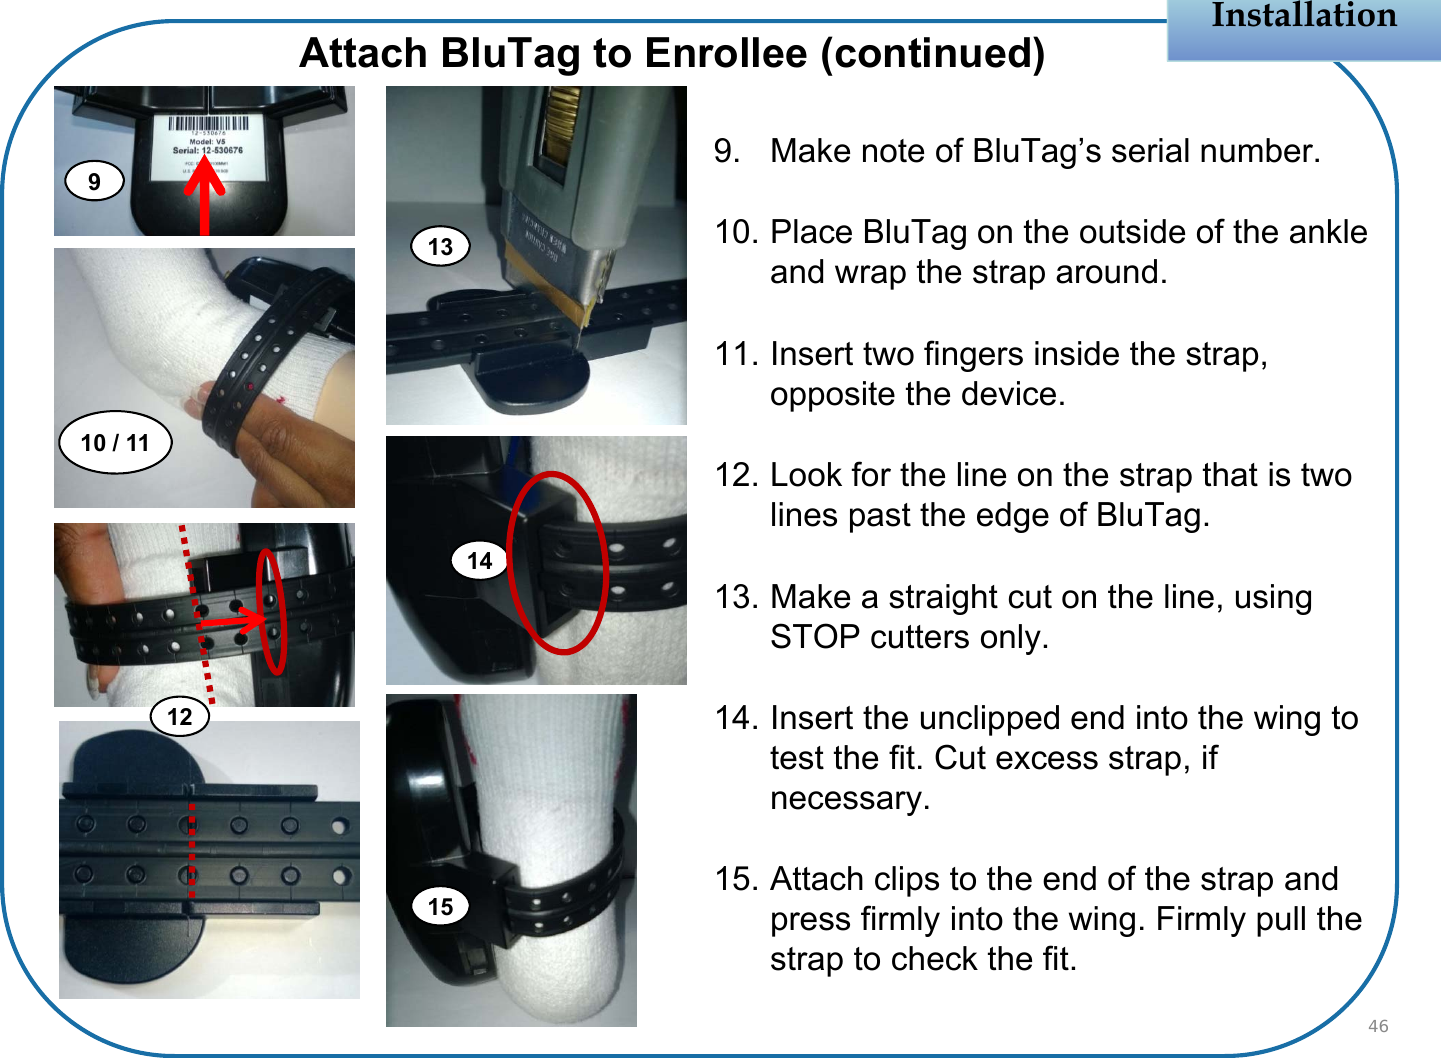 Installation9. Make note of BluTag’s serial number.10. Place BluTag on the outside of the ankle and wrap the strap around.11. Insert two fingers inside the strap, opposite the device.12. Look for the line on the strap that is two lines past the edge of BluTag.13. Make a straight cut on the line, using STOP cutters only.14. Insert the unclipped end into the wing to test the fit. Cut excess strap, if necessary.15. Attach clips to the end of the strap and press firmly into the wing. Firmly pull the strap to check the fit.46Attach BluTag to Enrollee (continued)1310 / 119121415